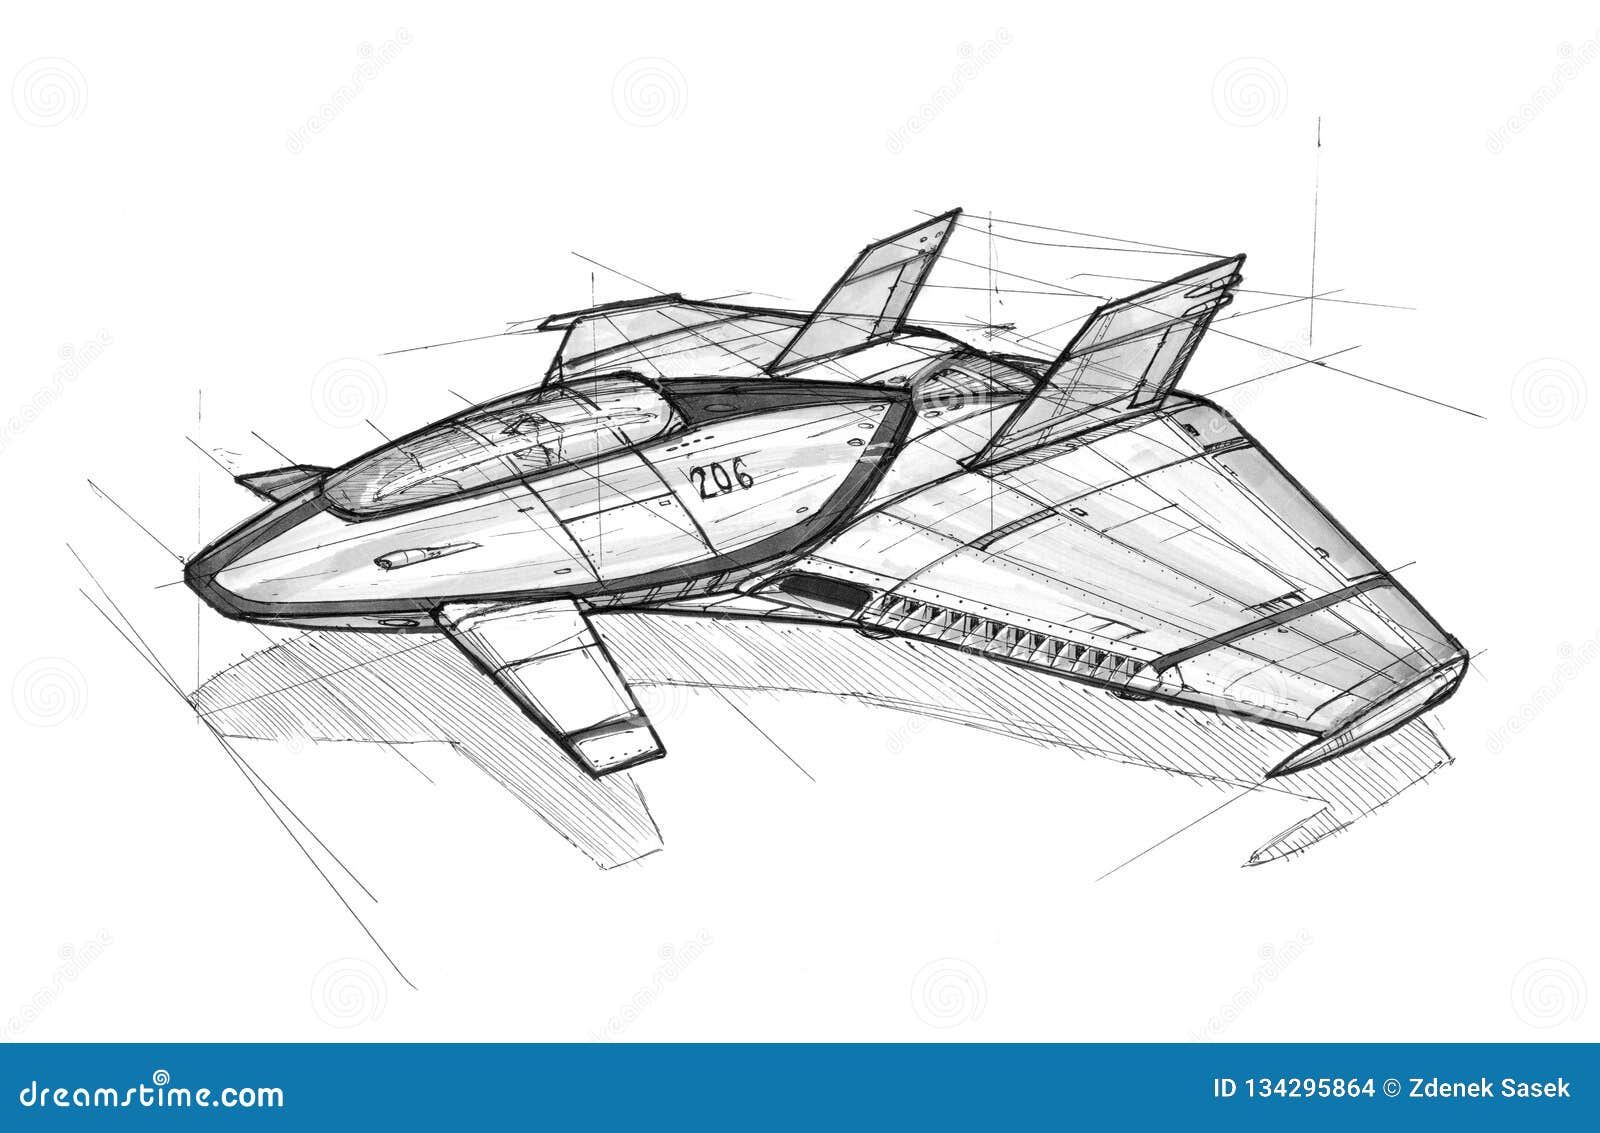 Ink Concept Art Drawing of Futuristic SpaceShip or Aircraft Stock  Illustration - Illustration of concept, drawing: 134295864